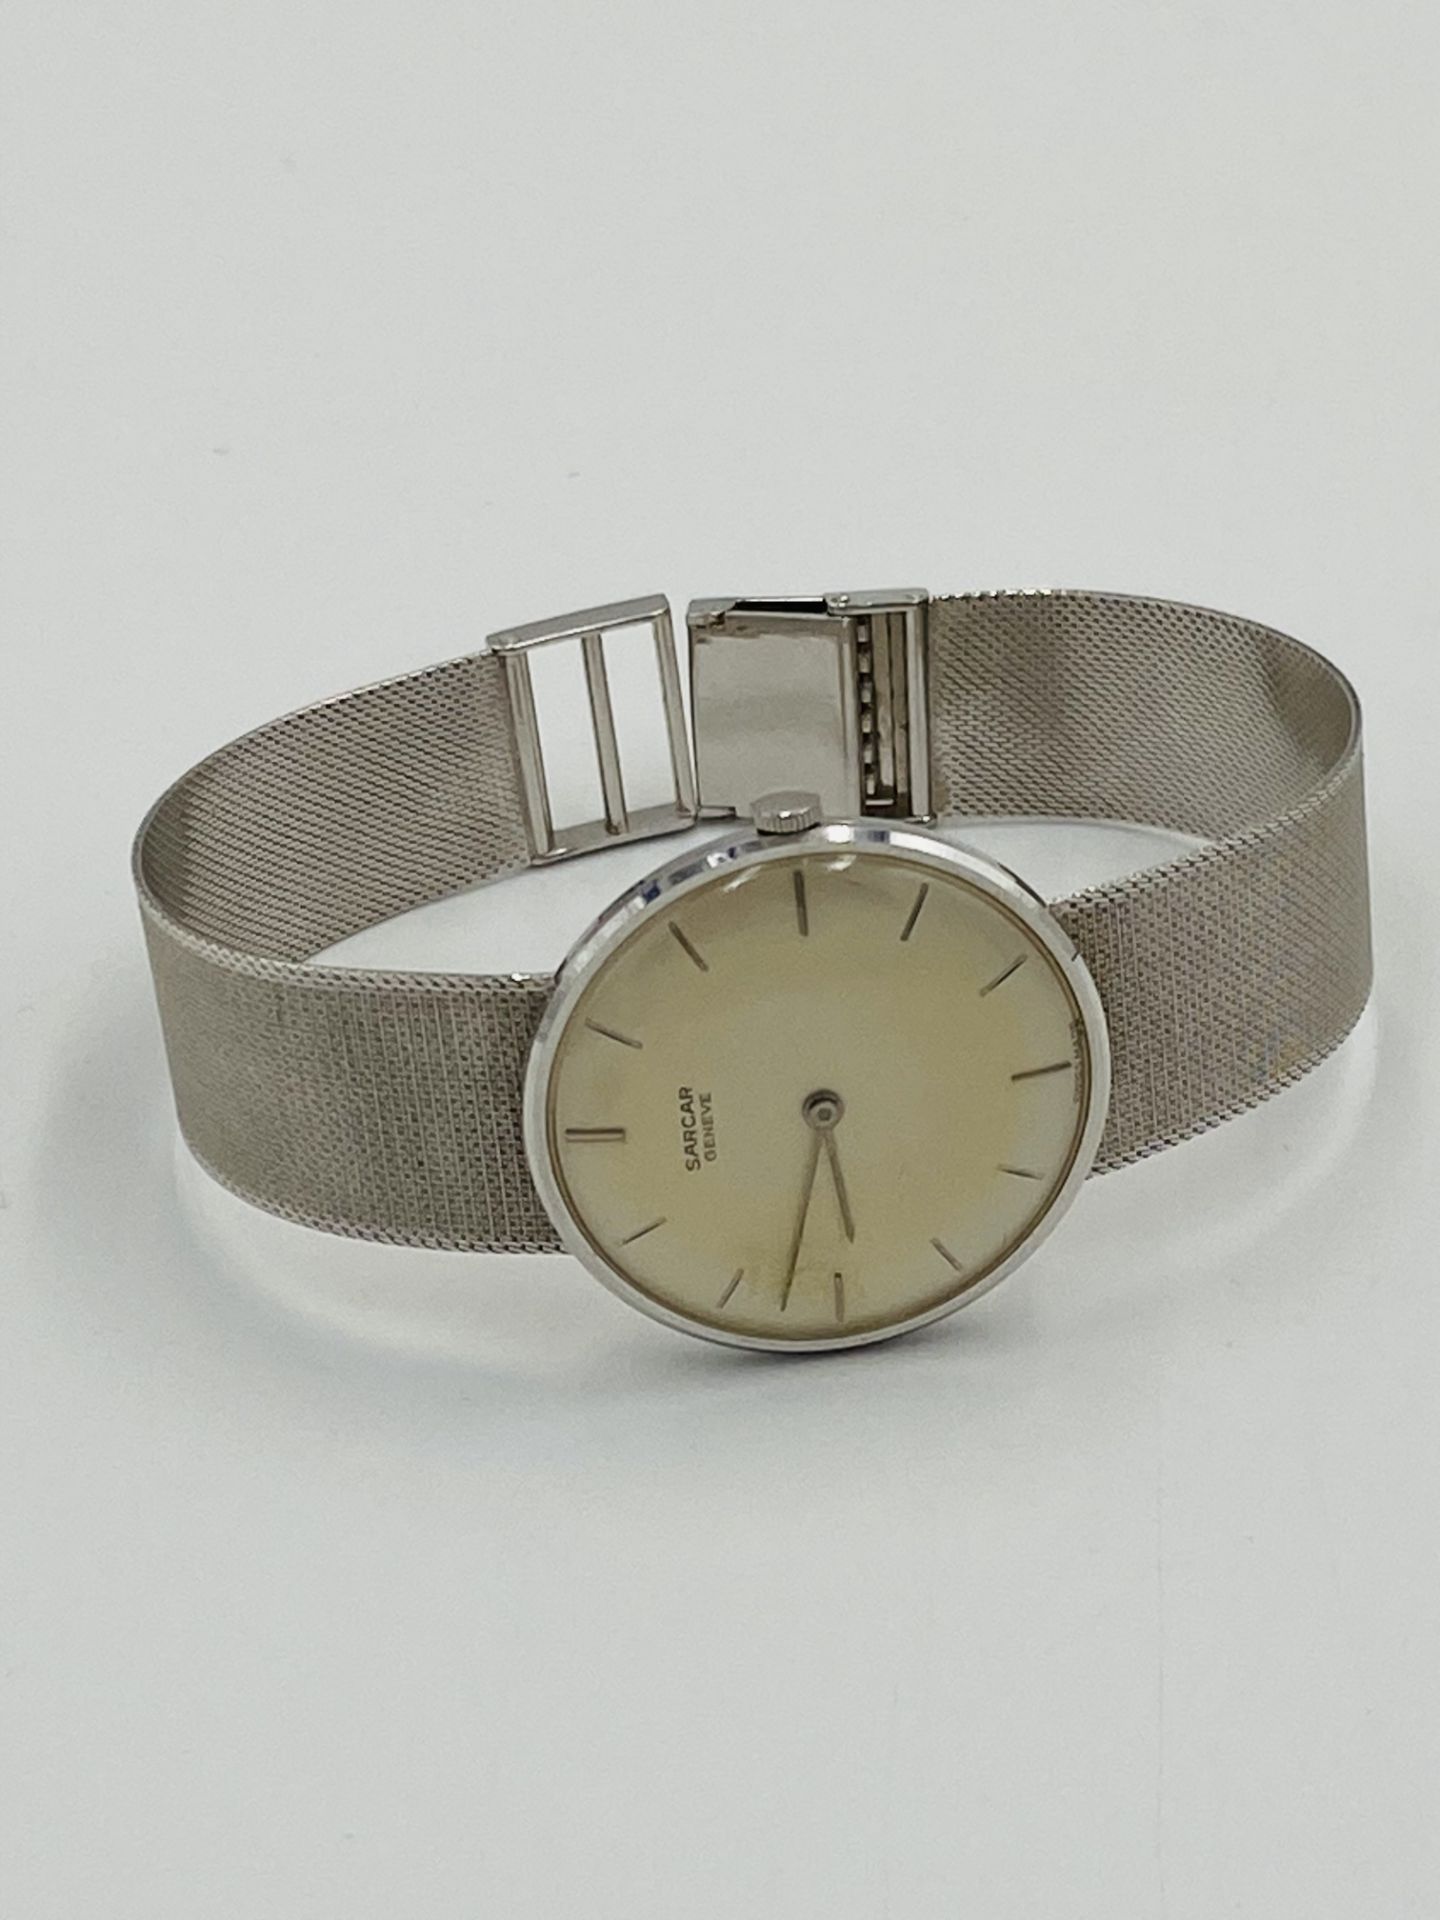 Sarcar Geneve wristwatch with 18ct gold strap - Image 3 of 7